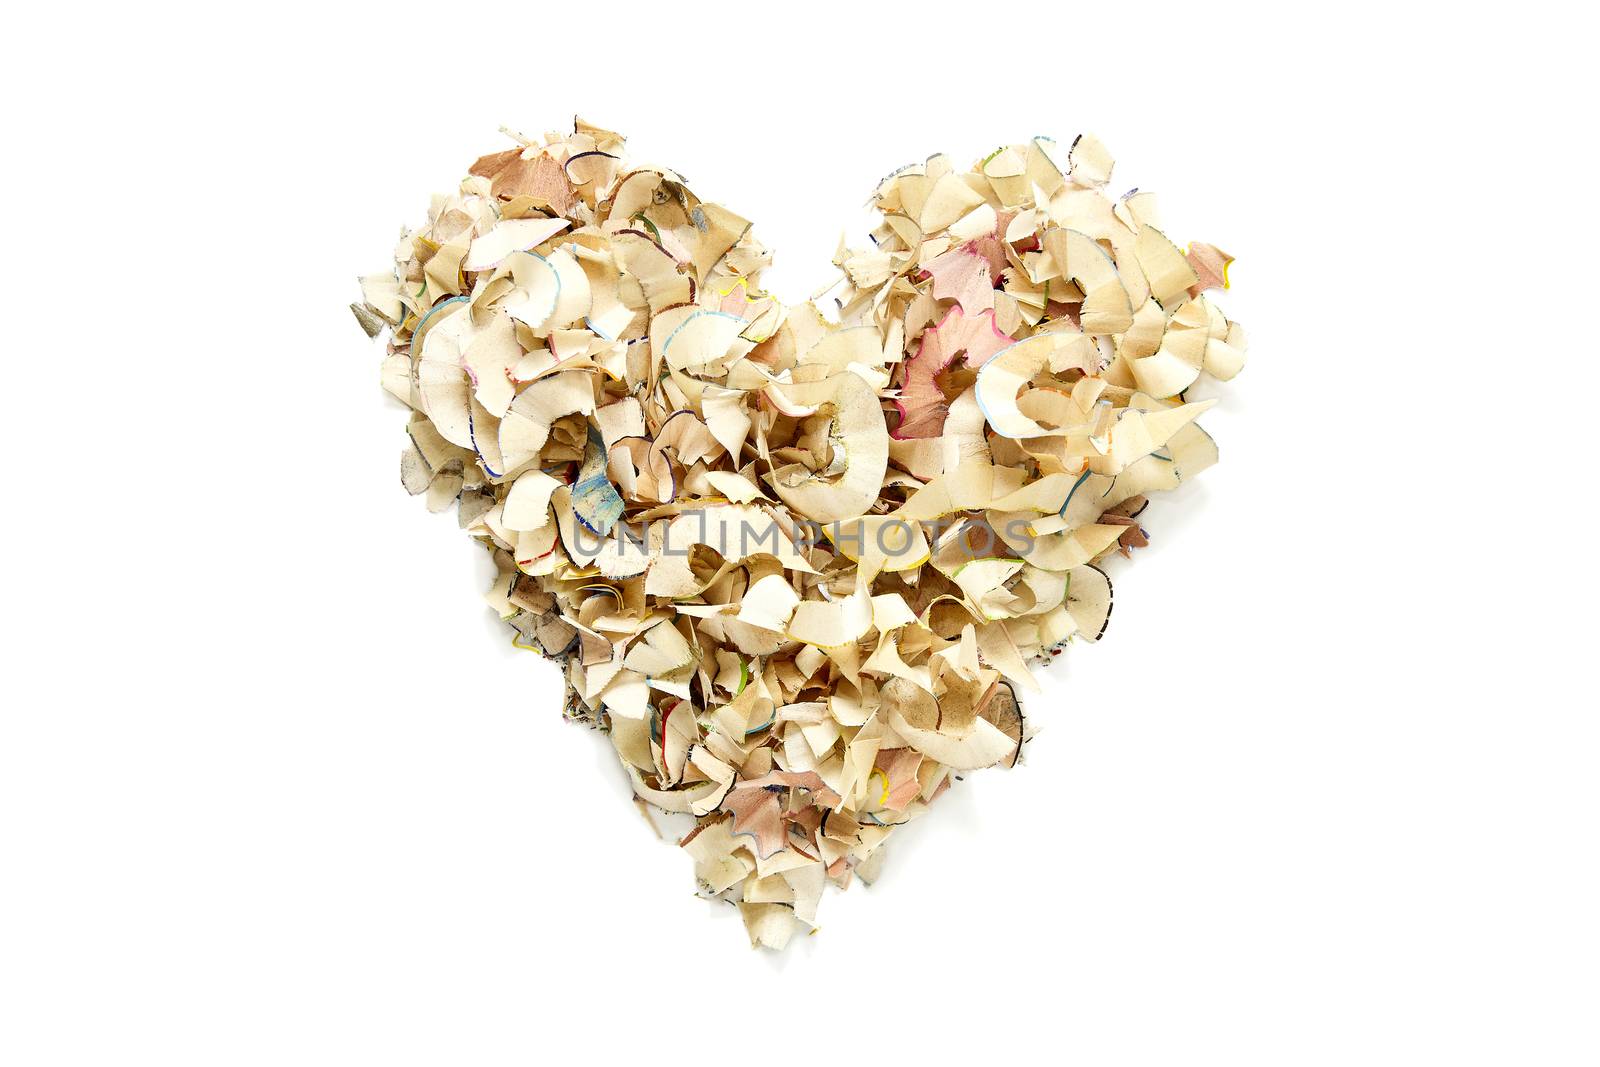 Heart shape made from pencil shavings for use in your Valentine's Day design.